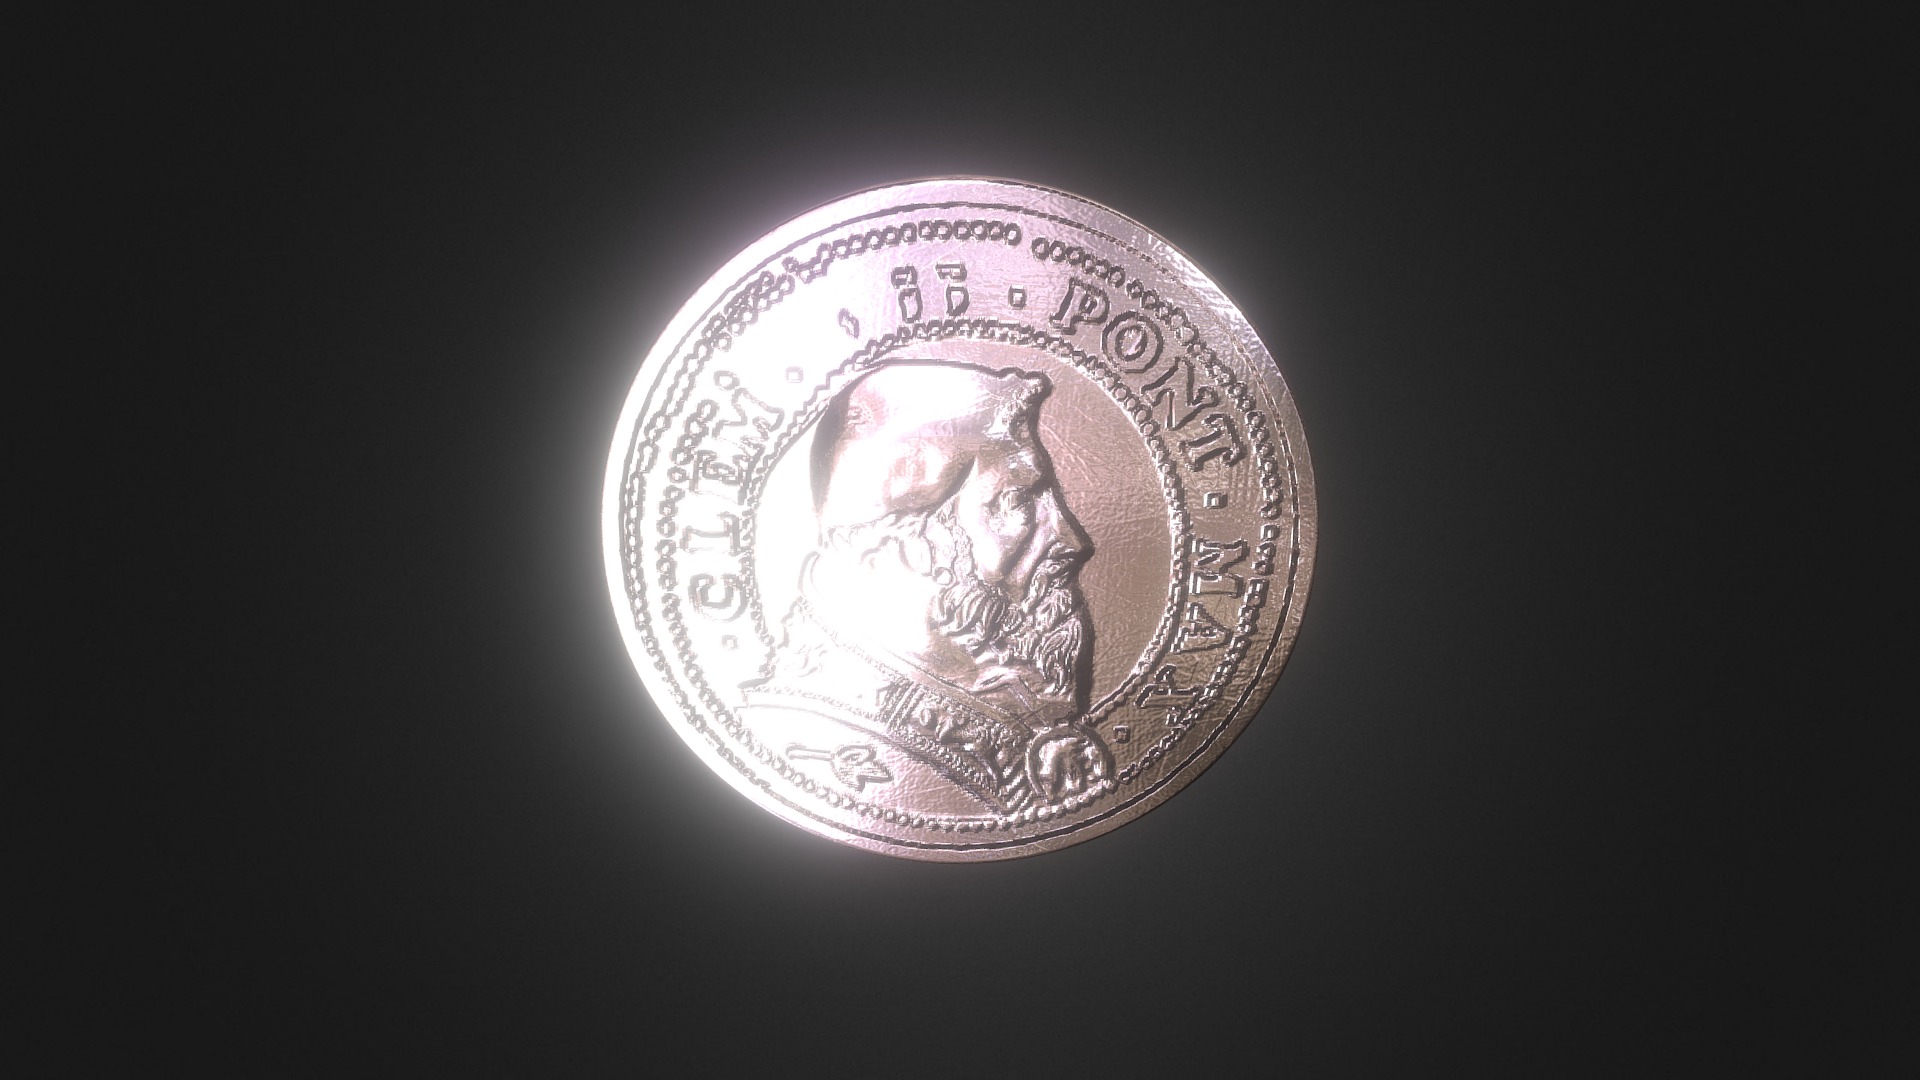 3D model Vatican 3 - This is a 3D model of the Vatican 3. The 3D model is about a coin with a person's face on it.